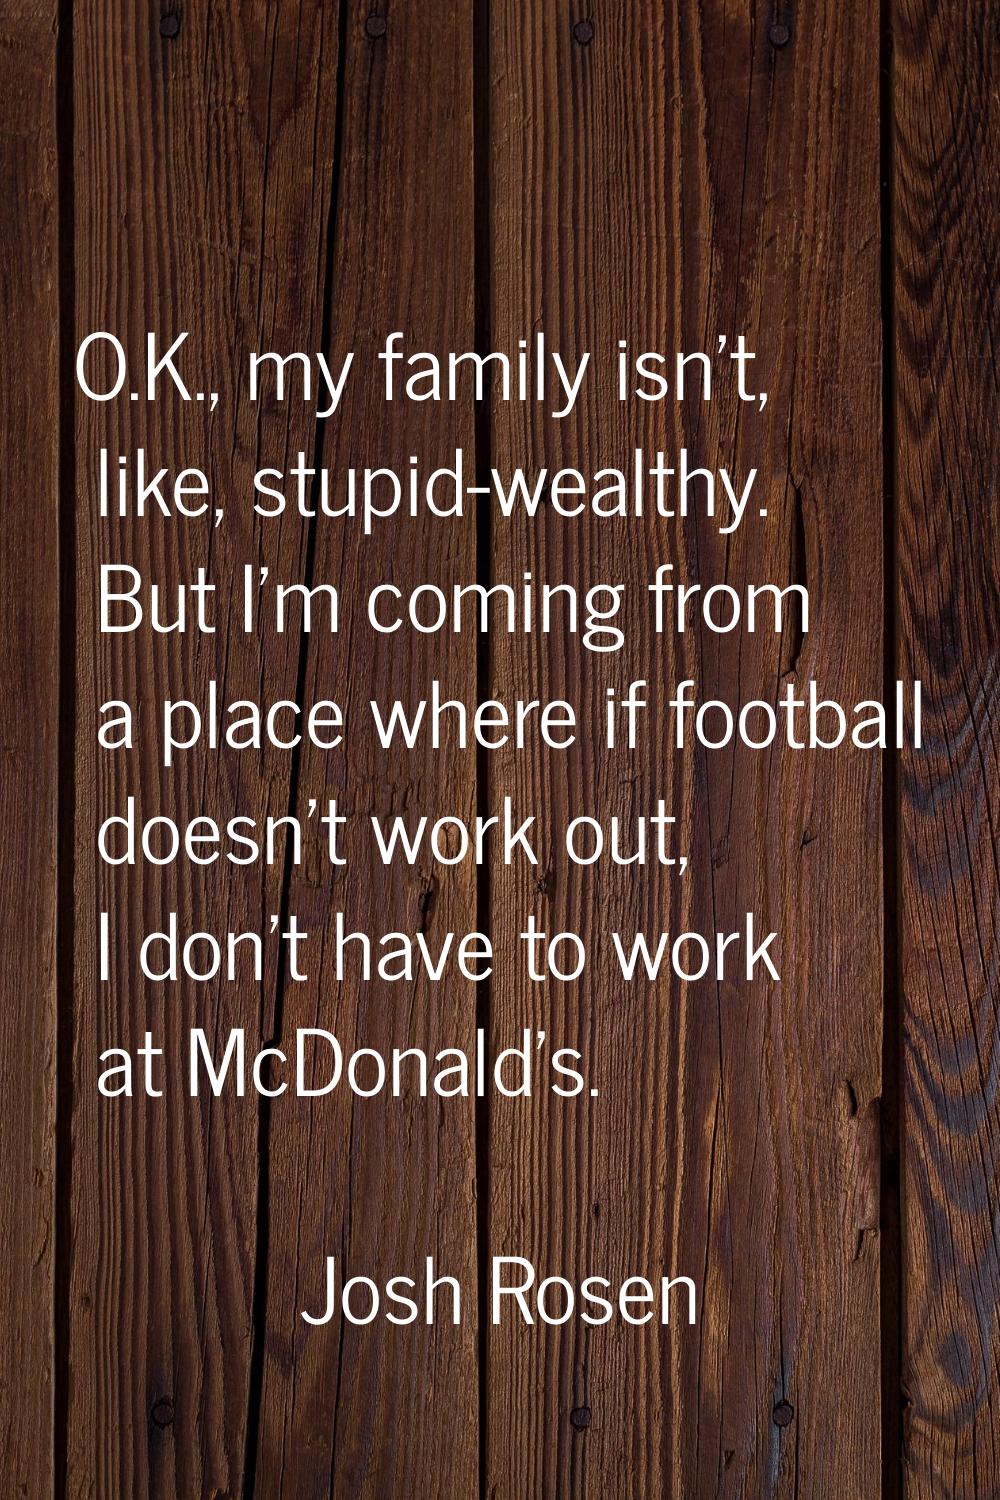 O.K., my family isn't, like, stupid-wealthy. But I'm coming from a place where if football doesn't 